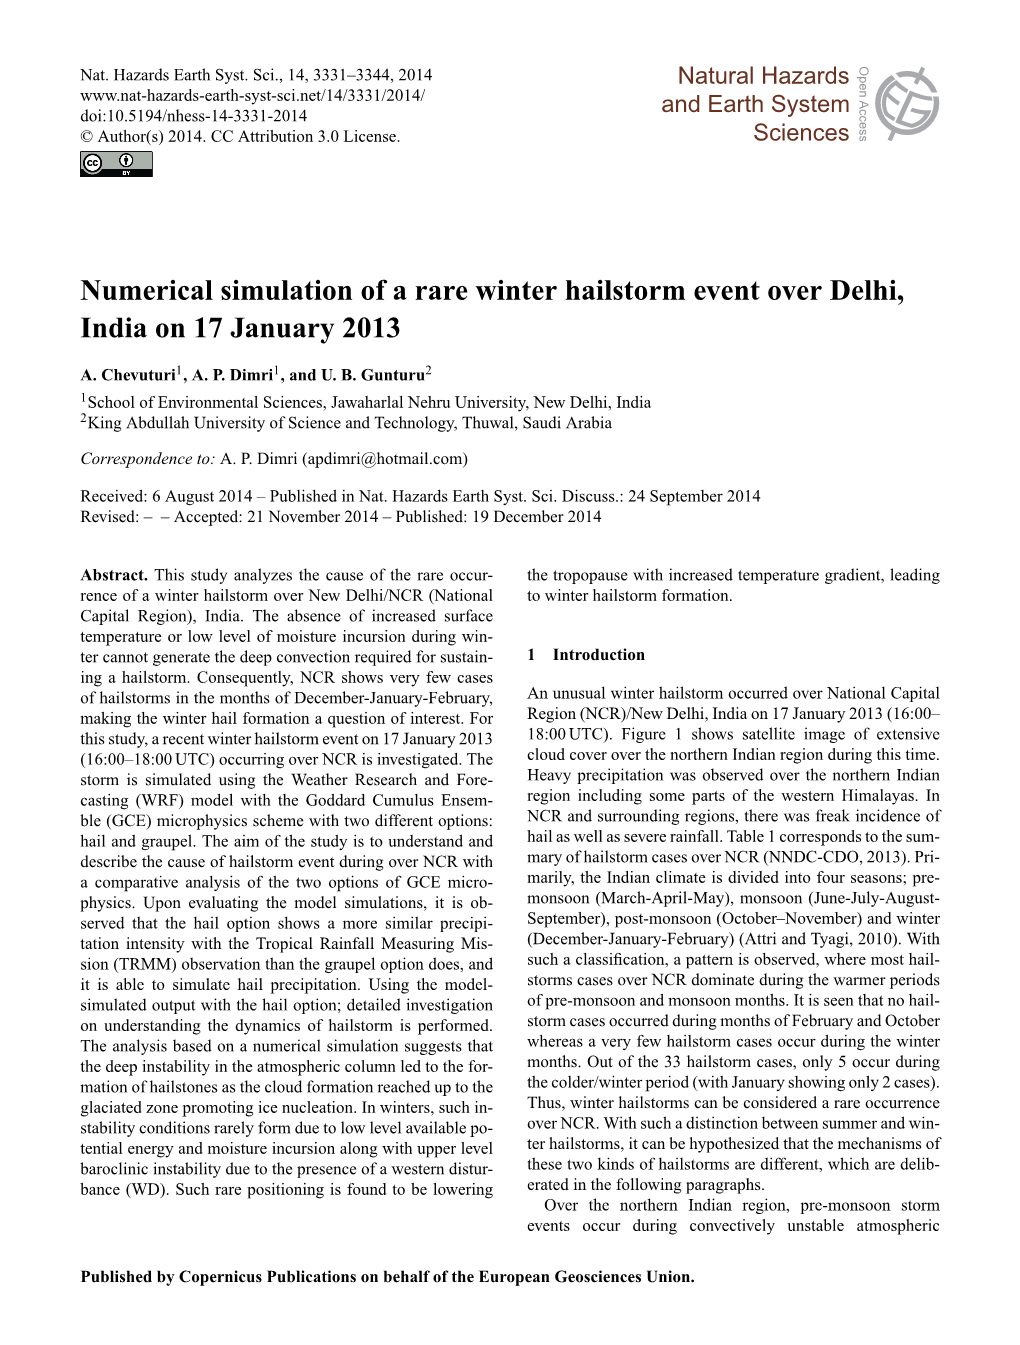 Numerical Simulation of a Rare Winter Hailstorm Event Over Delhi, India on 17 January 2013